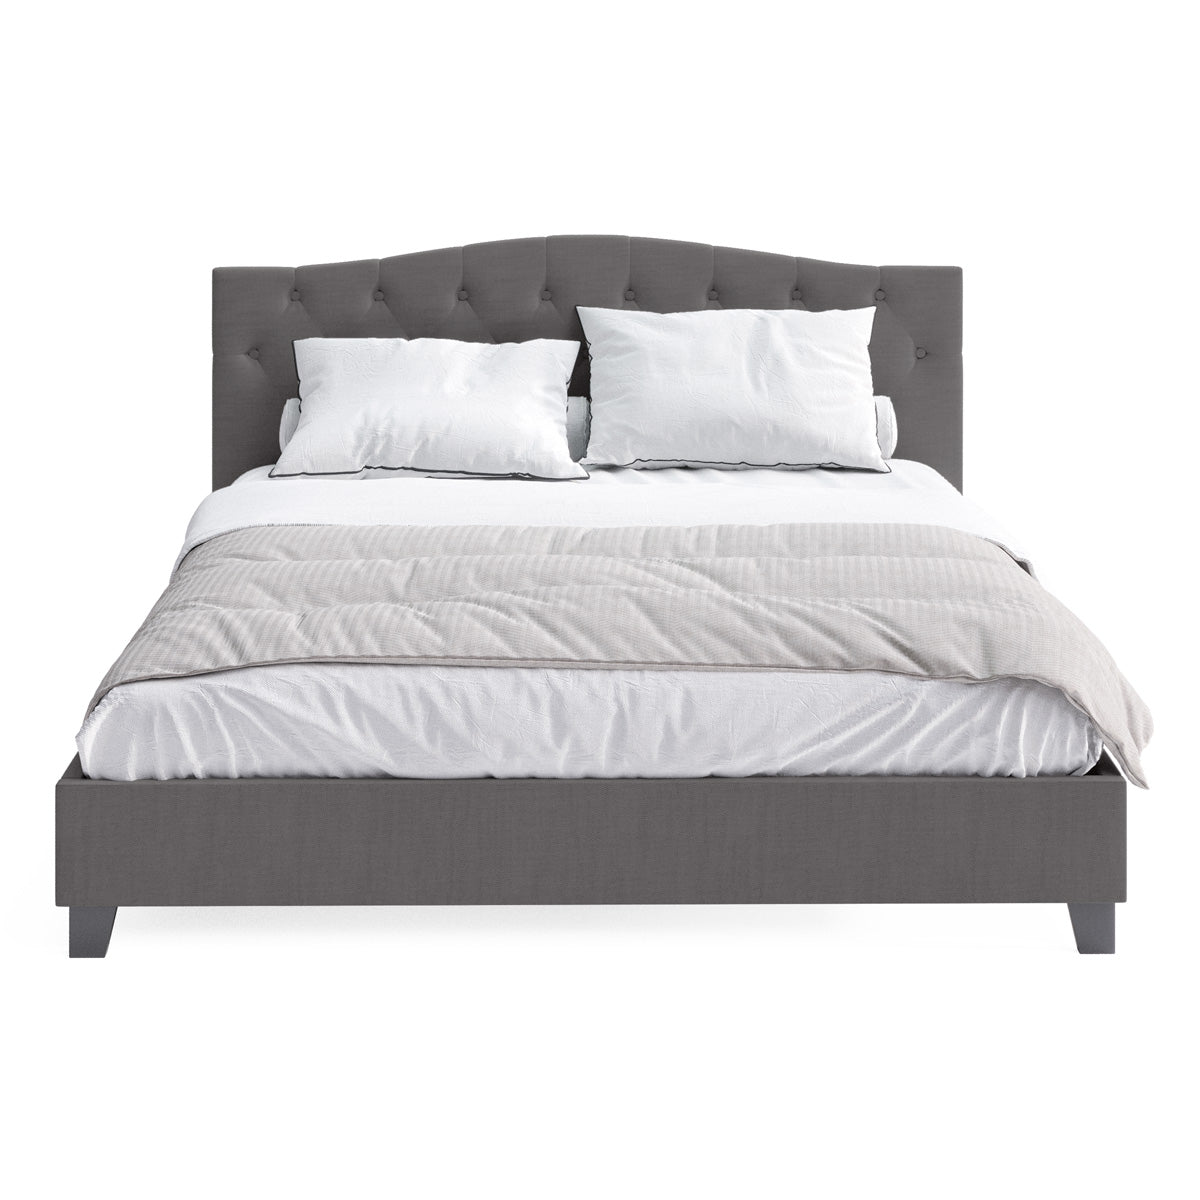 Sonata Fabric Curved Bed Frame (Charcoal)